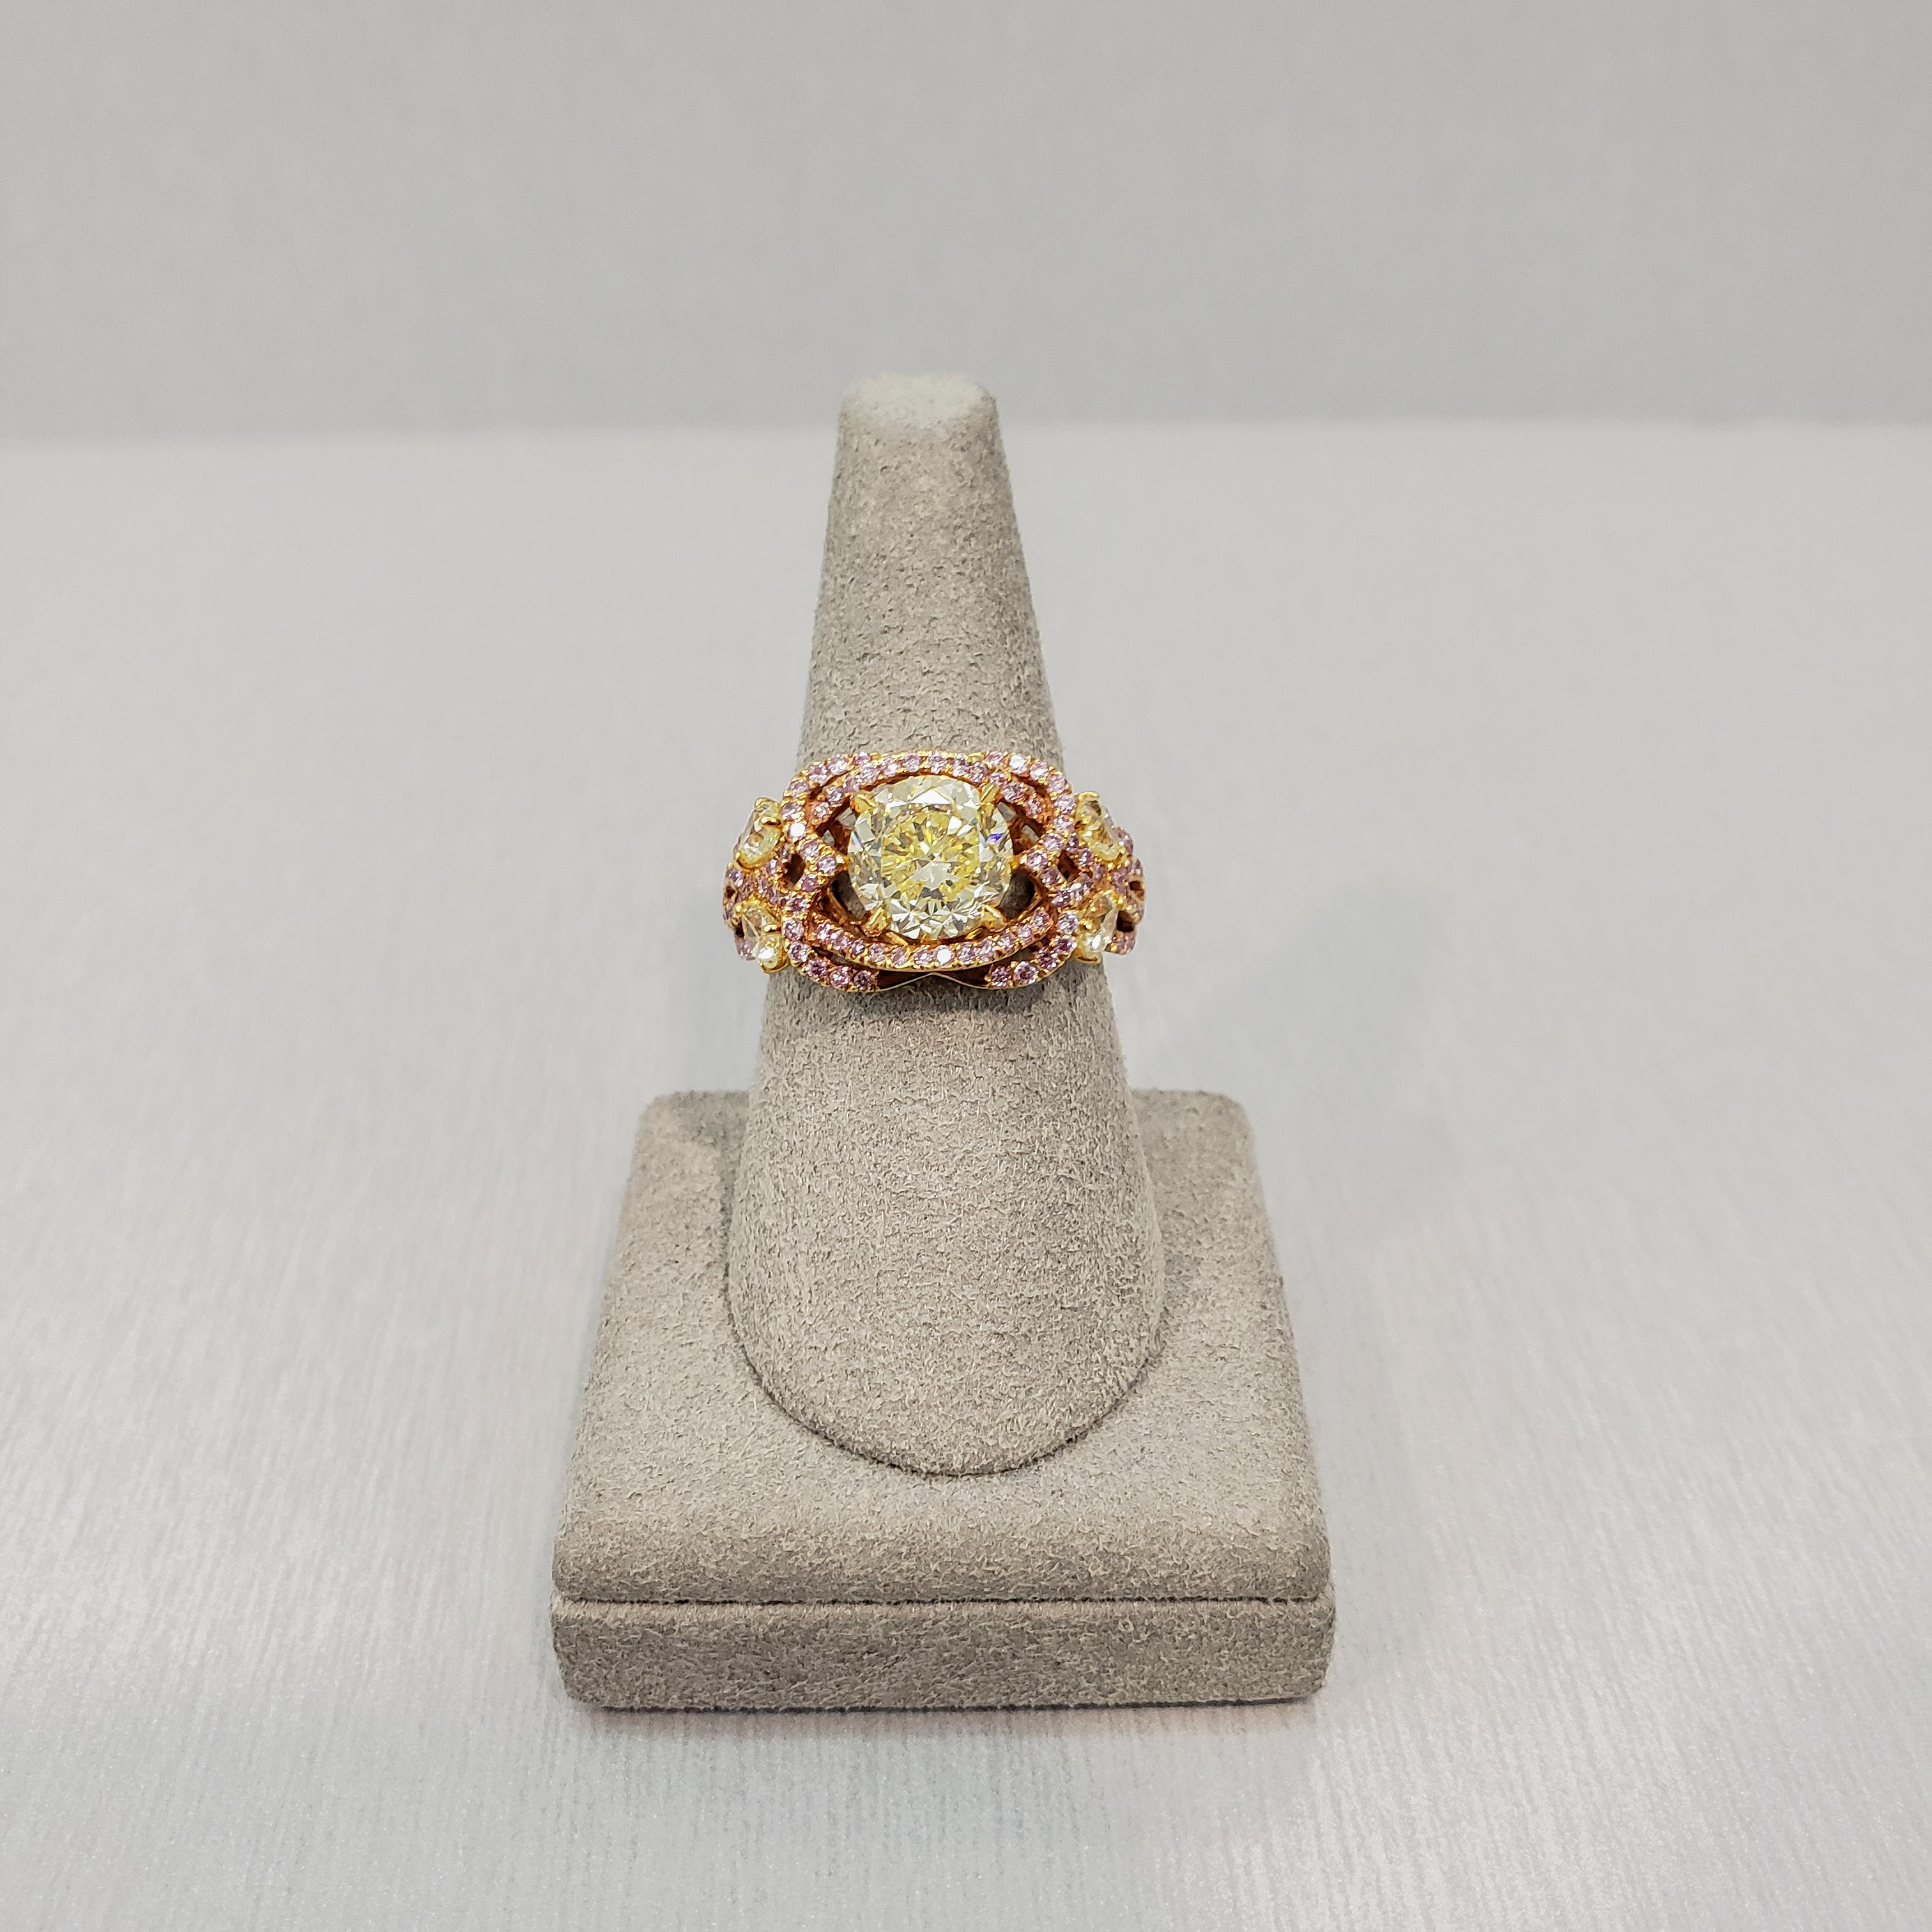 Contemporary 1.97 Carats Mixed Cut Fancy Intense Yellow and Pink Diamond Engagement Ring For Sale